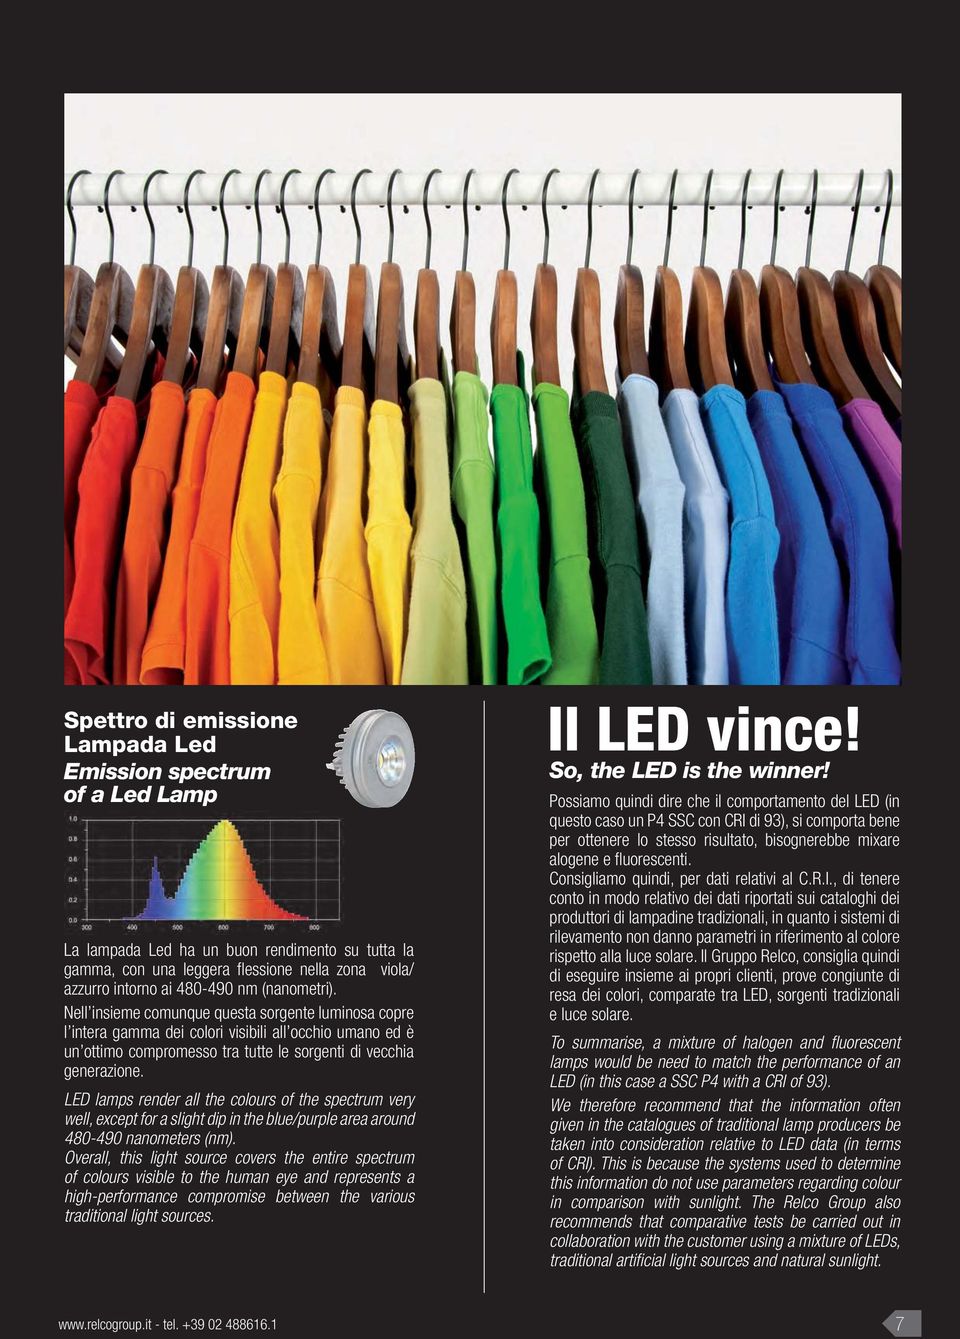 LED lamps render all the colours of the spectrum very well, except for a slight dip in the blue/purple area around 480-490 nanometers (nm).